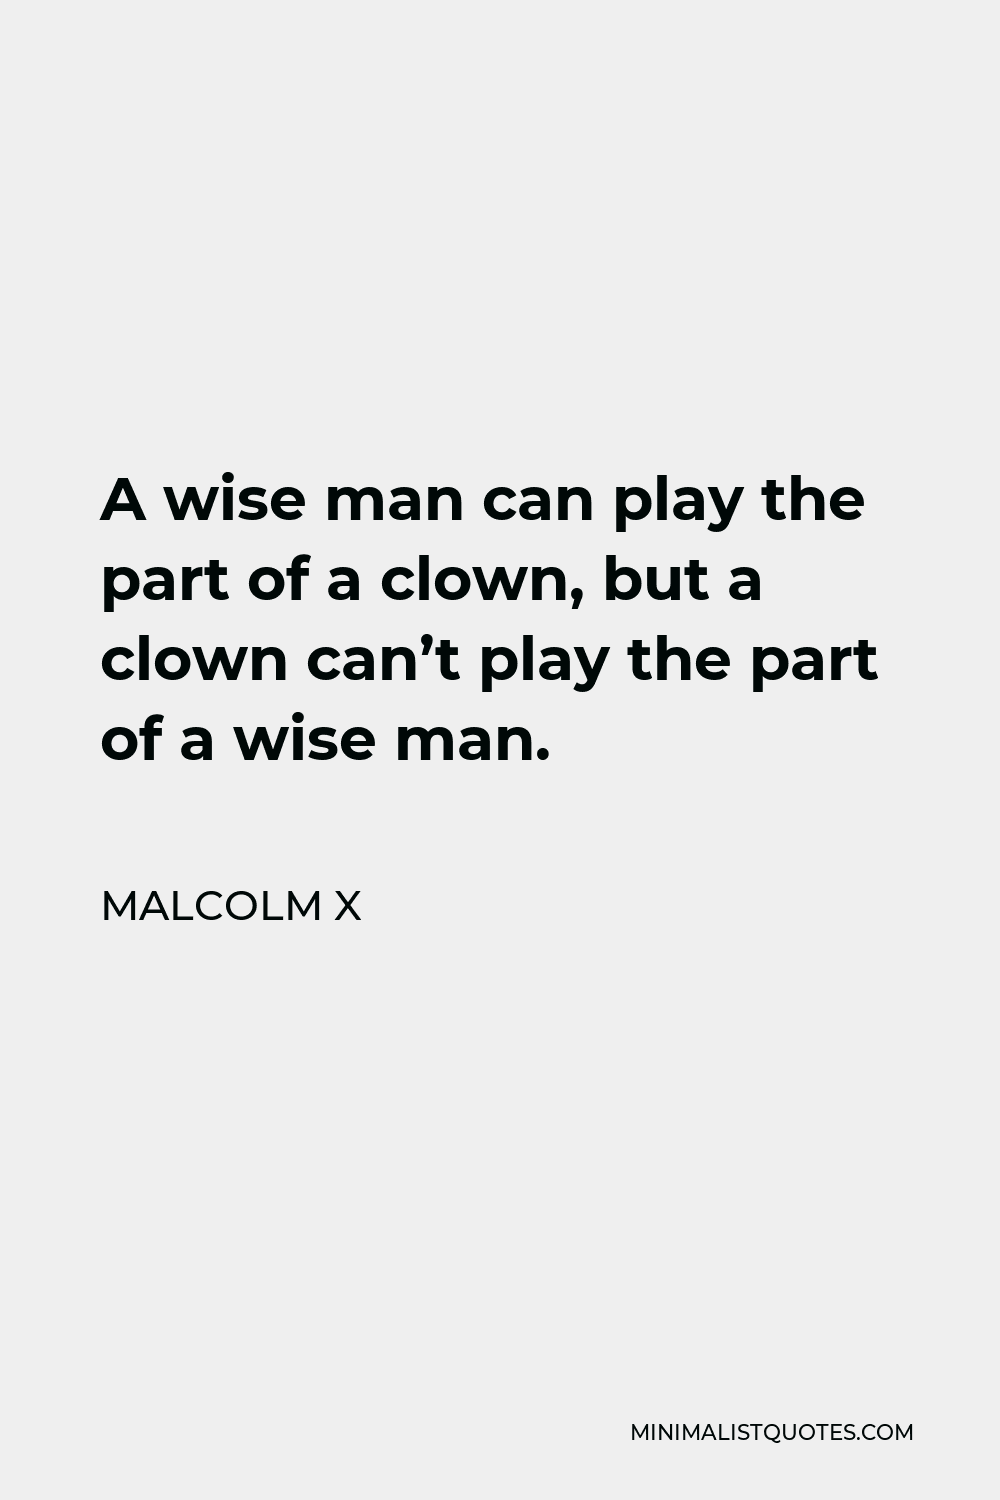 Part of a Clown - Malcolm X Quote Famous Life Motivation Quotes